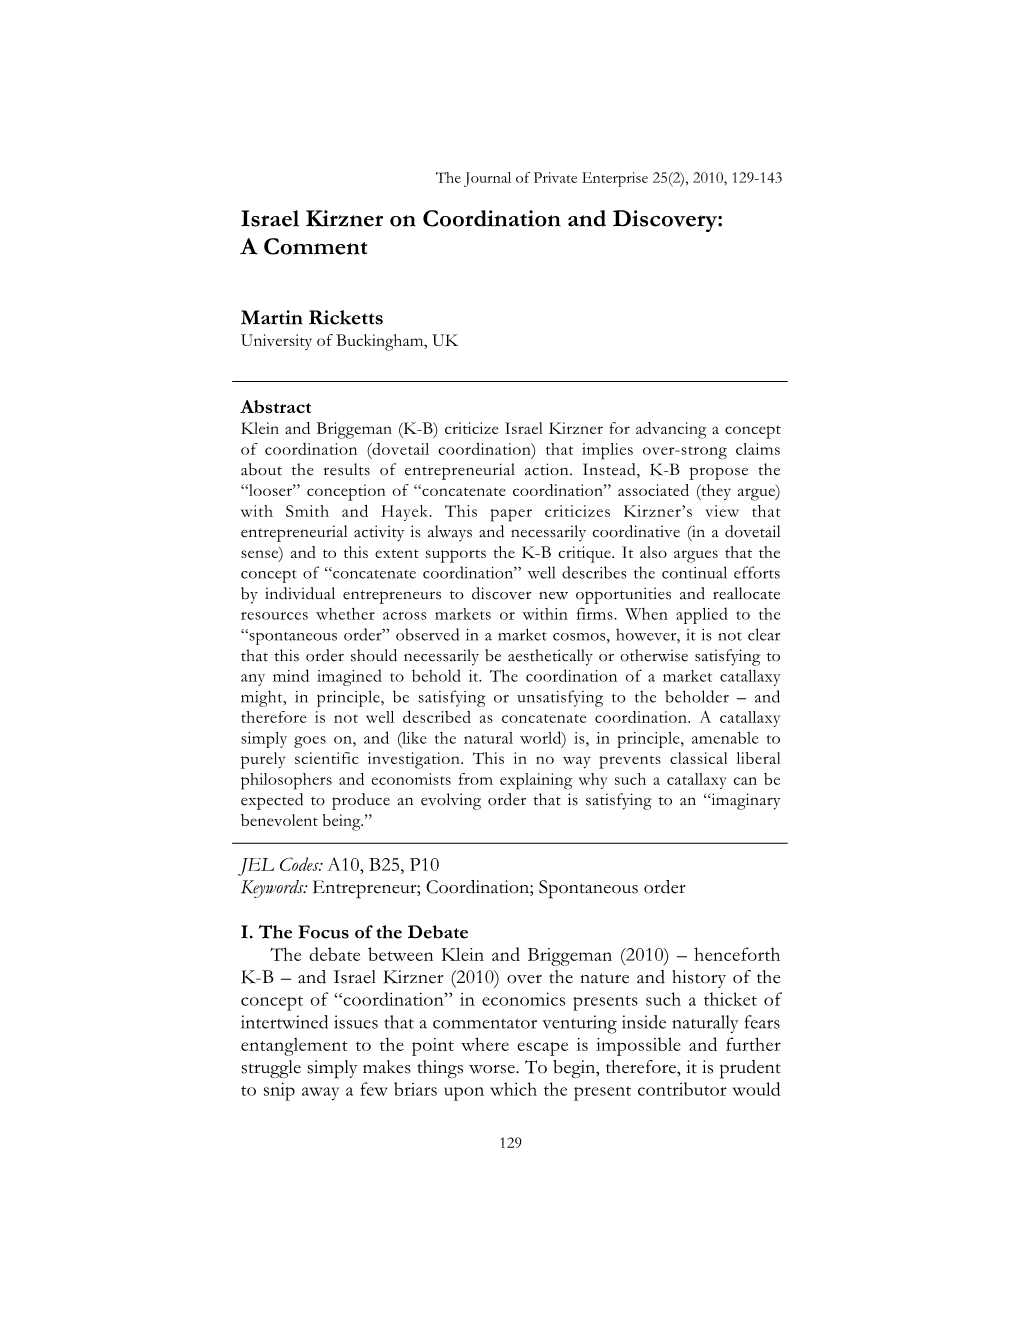 Israel Kirzner on Coordination and Discovery: a Comment